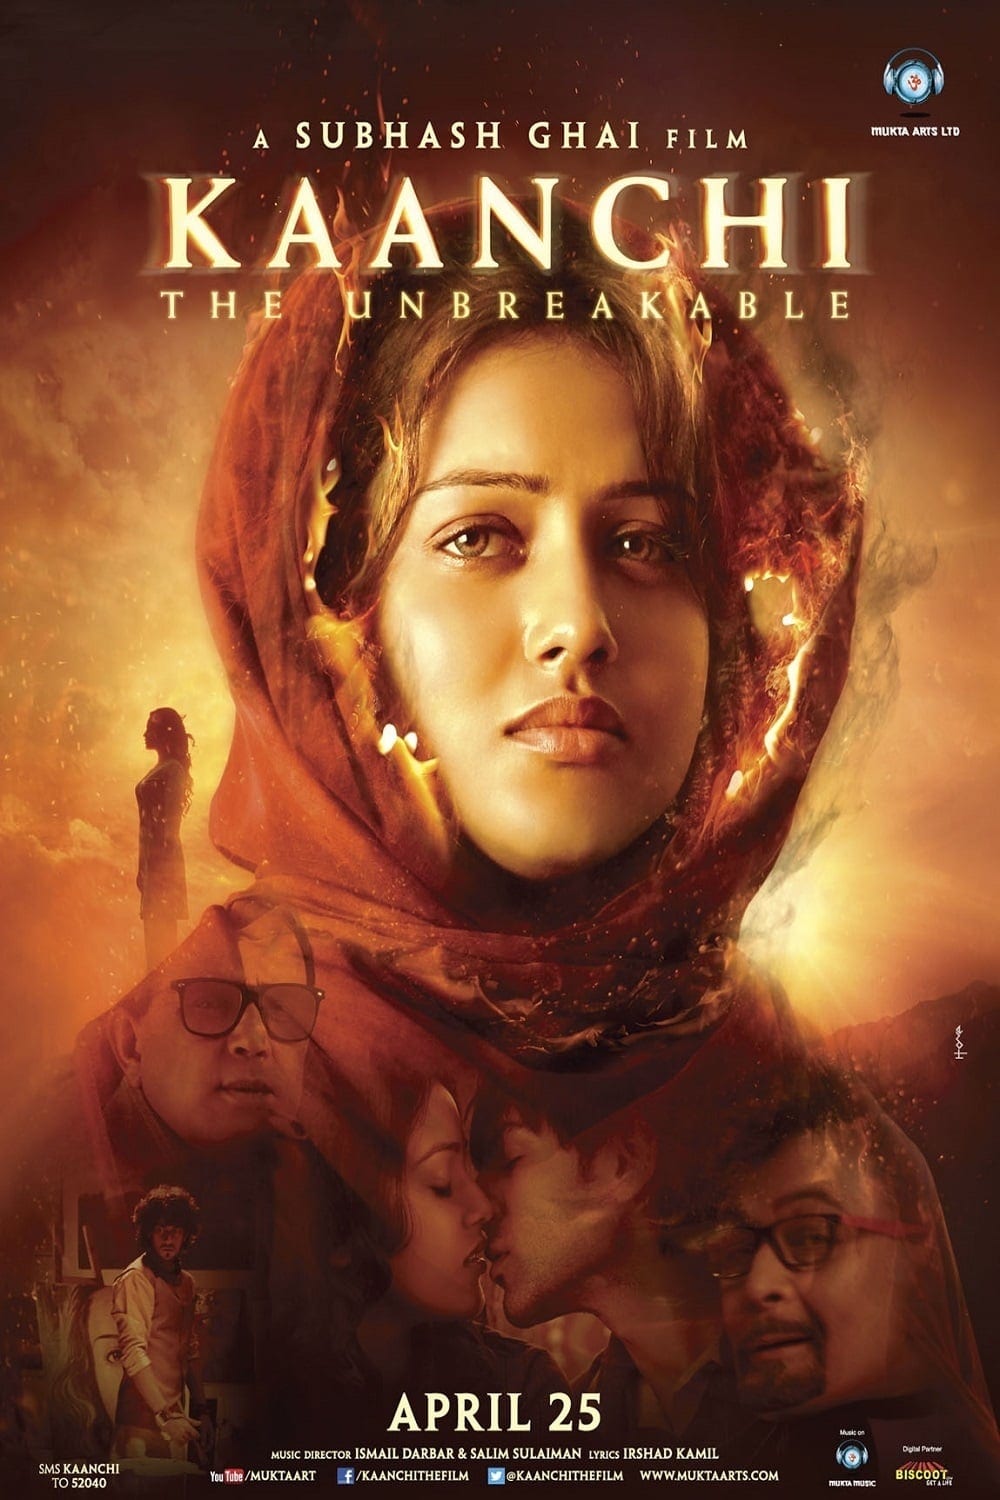 Poster for the movie "Kaanchi: The Unbreakable"